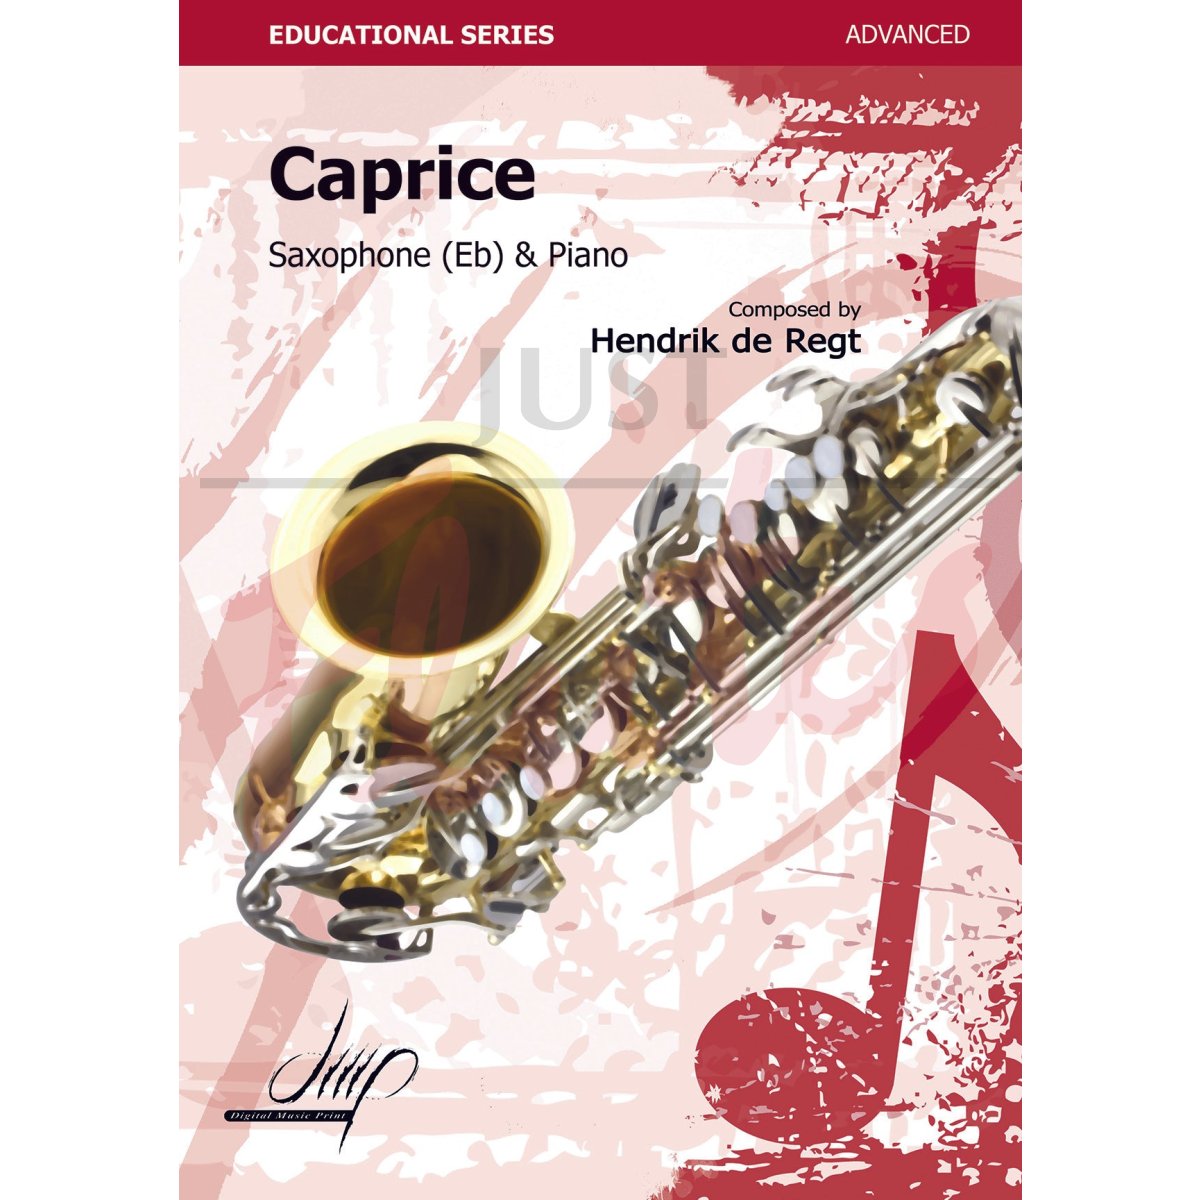 Caprice for Alto Saxophone and Piano